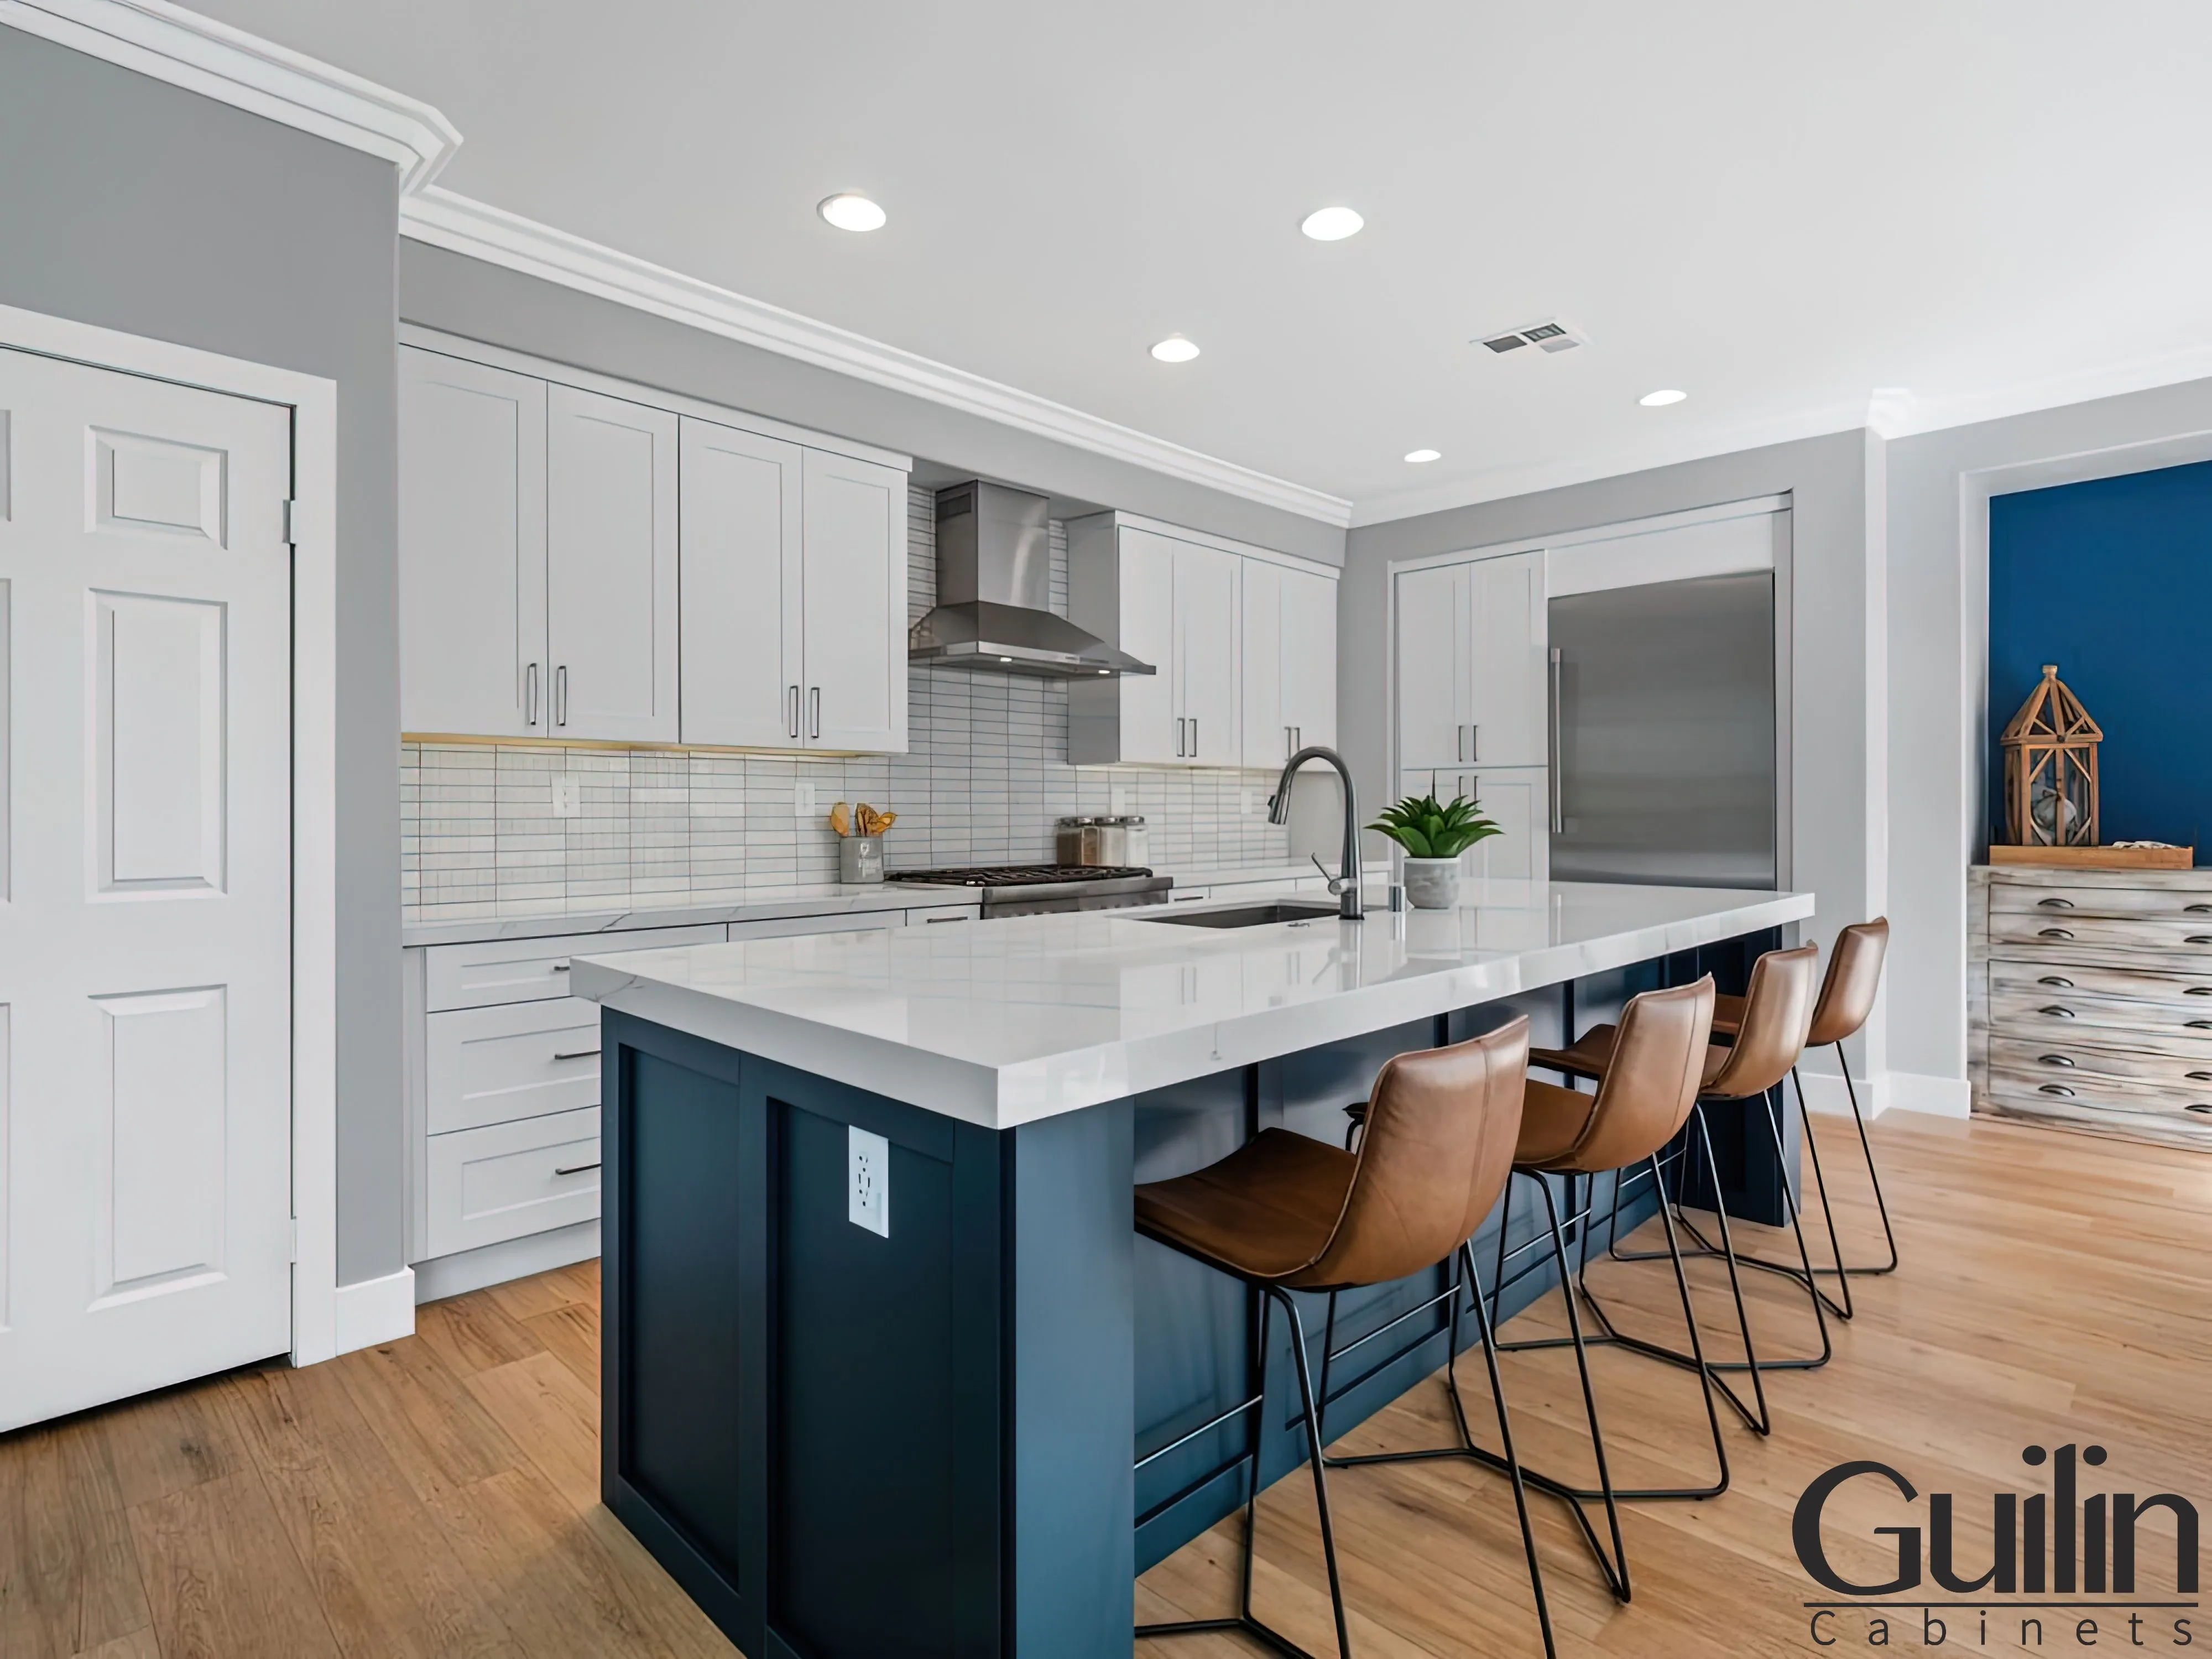 Navy blue cabinets with white cabinets are a striking choice that can add vibrancy and modern flair to your space.